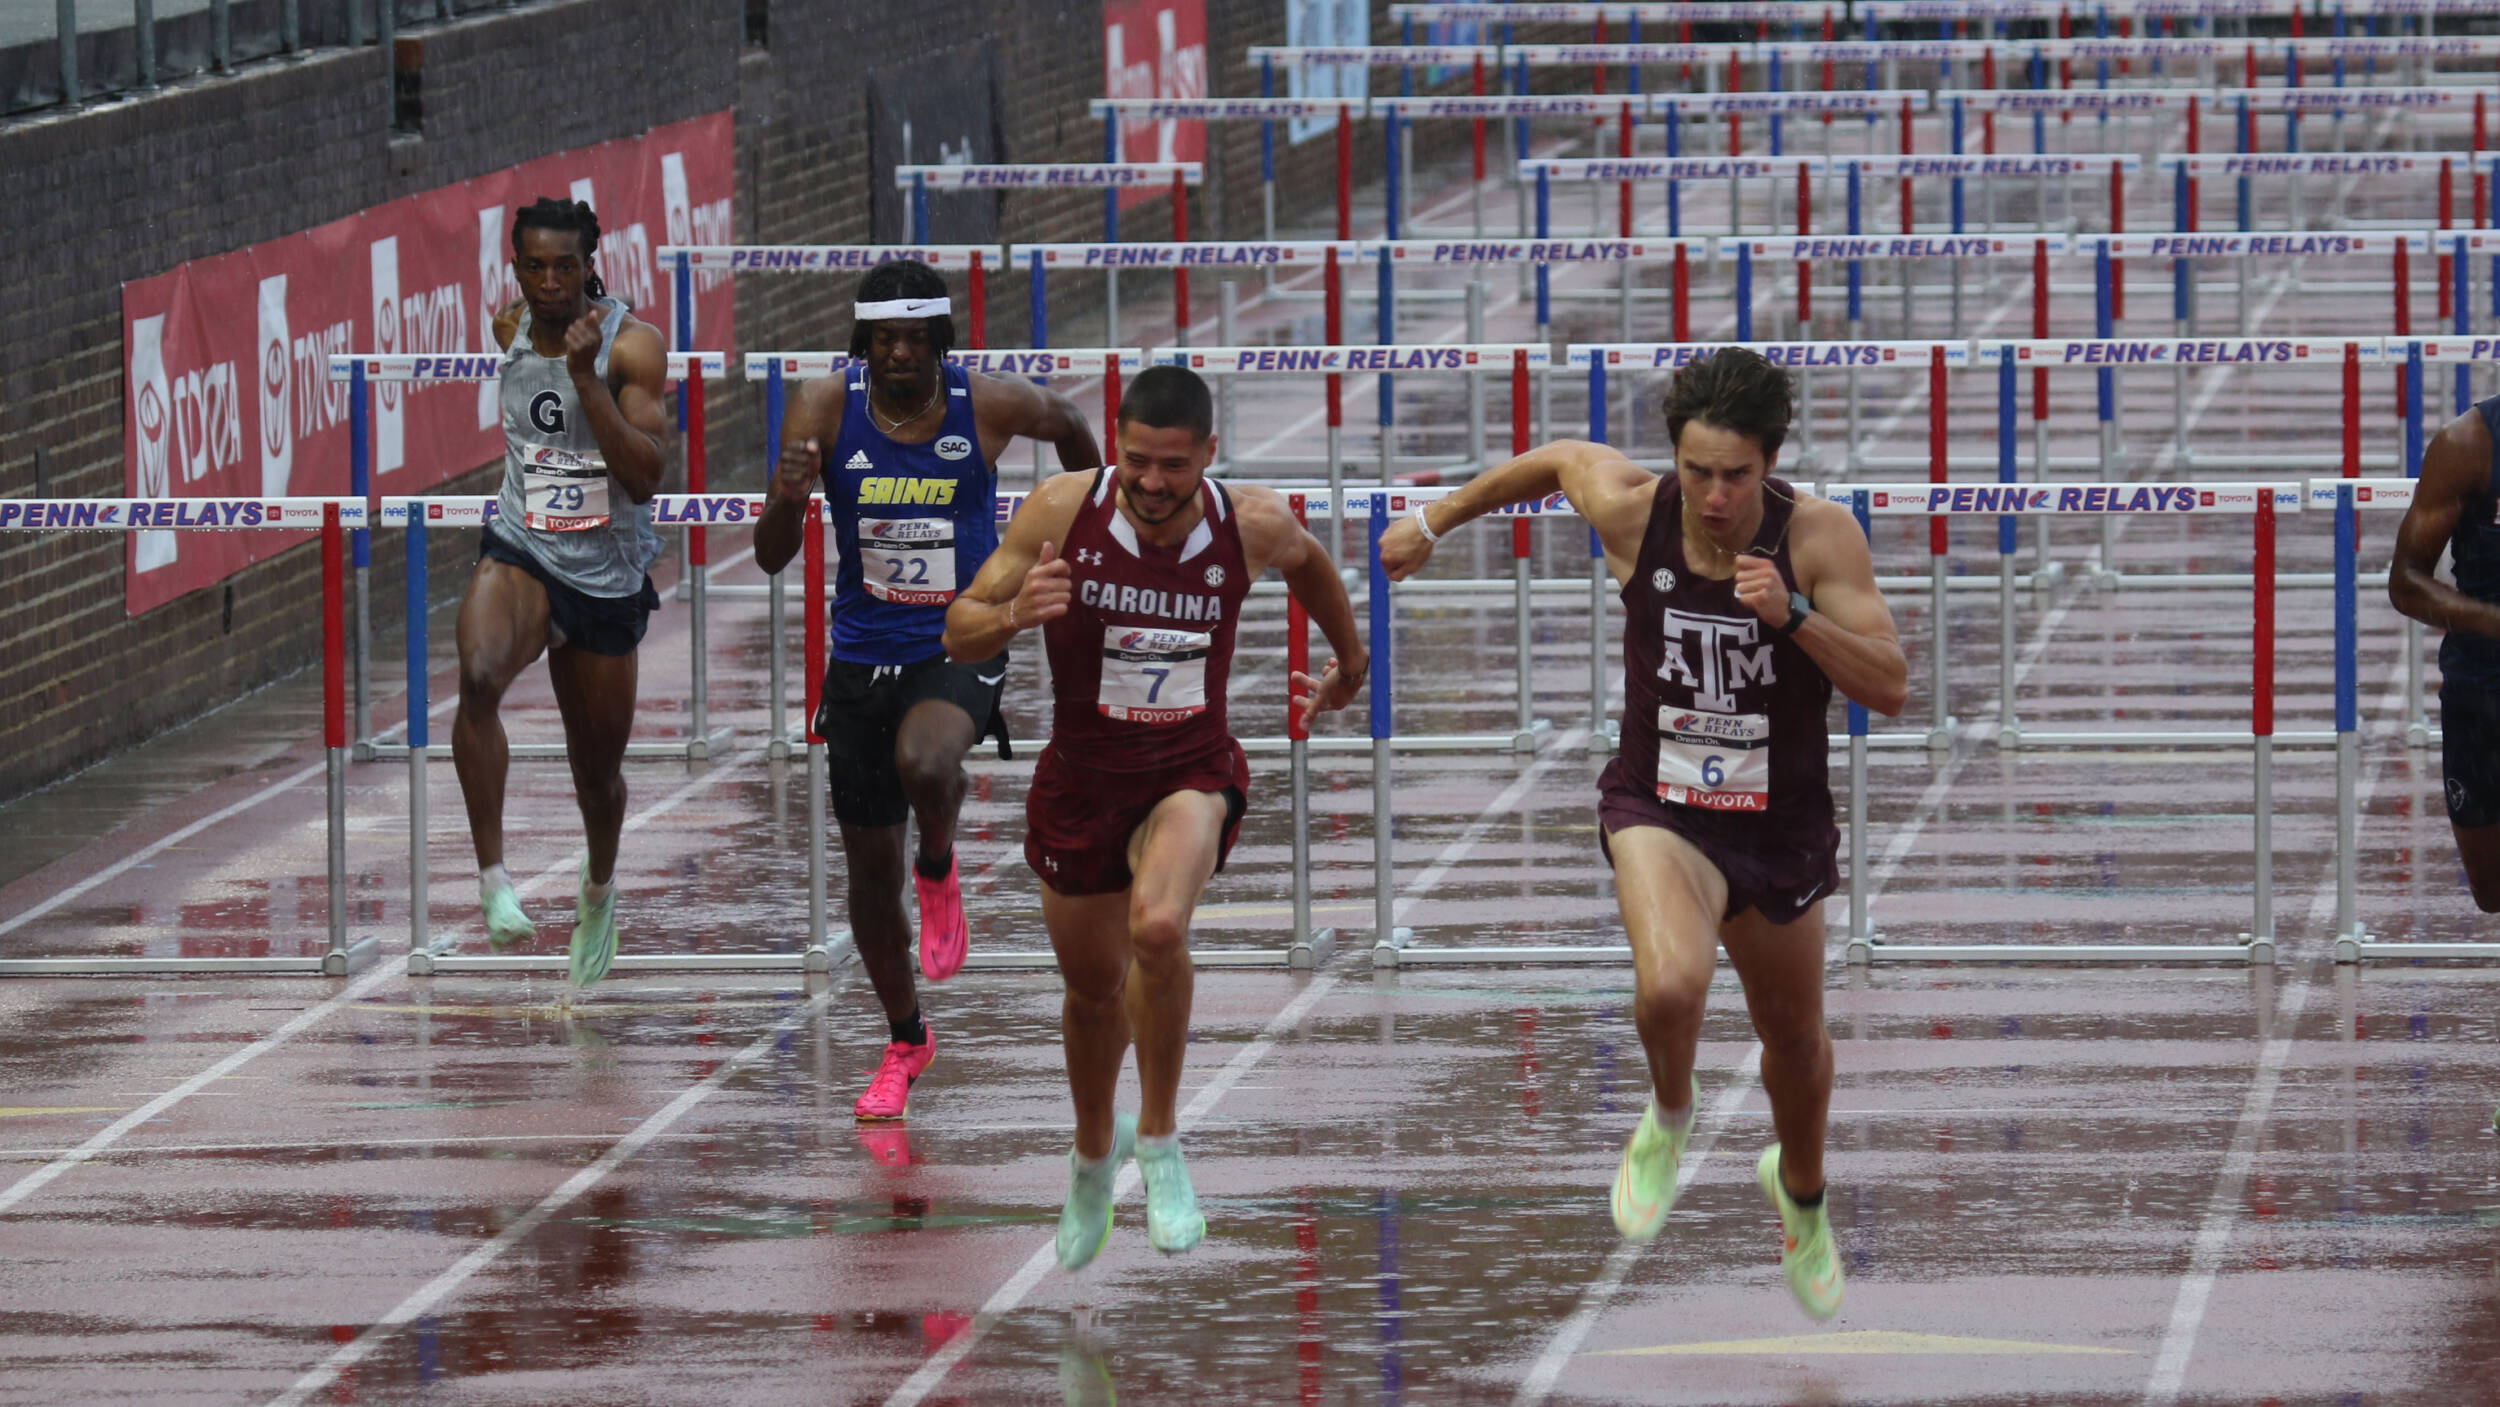 Gamecocks Battle Elements in Day Two of Penn Relays